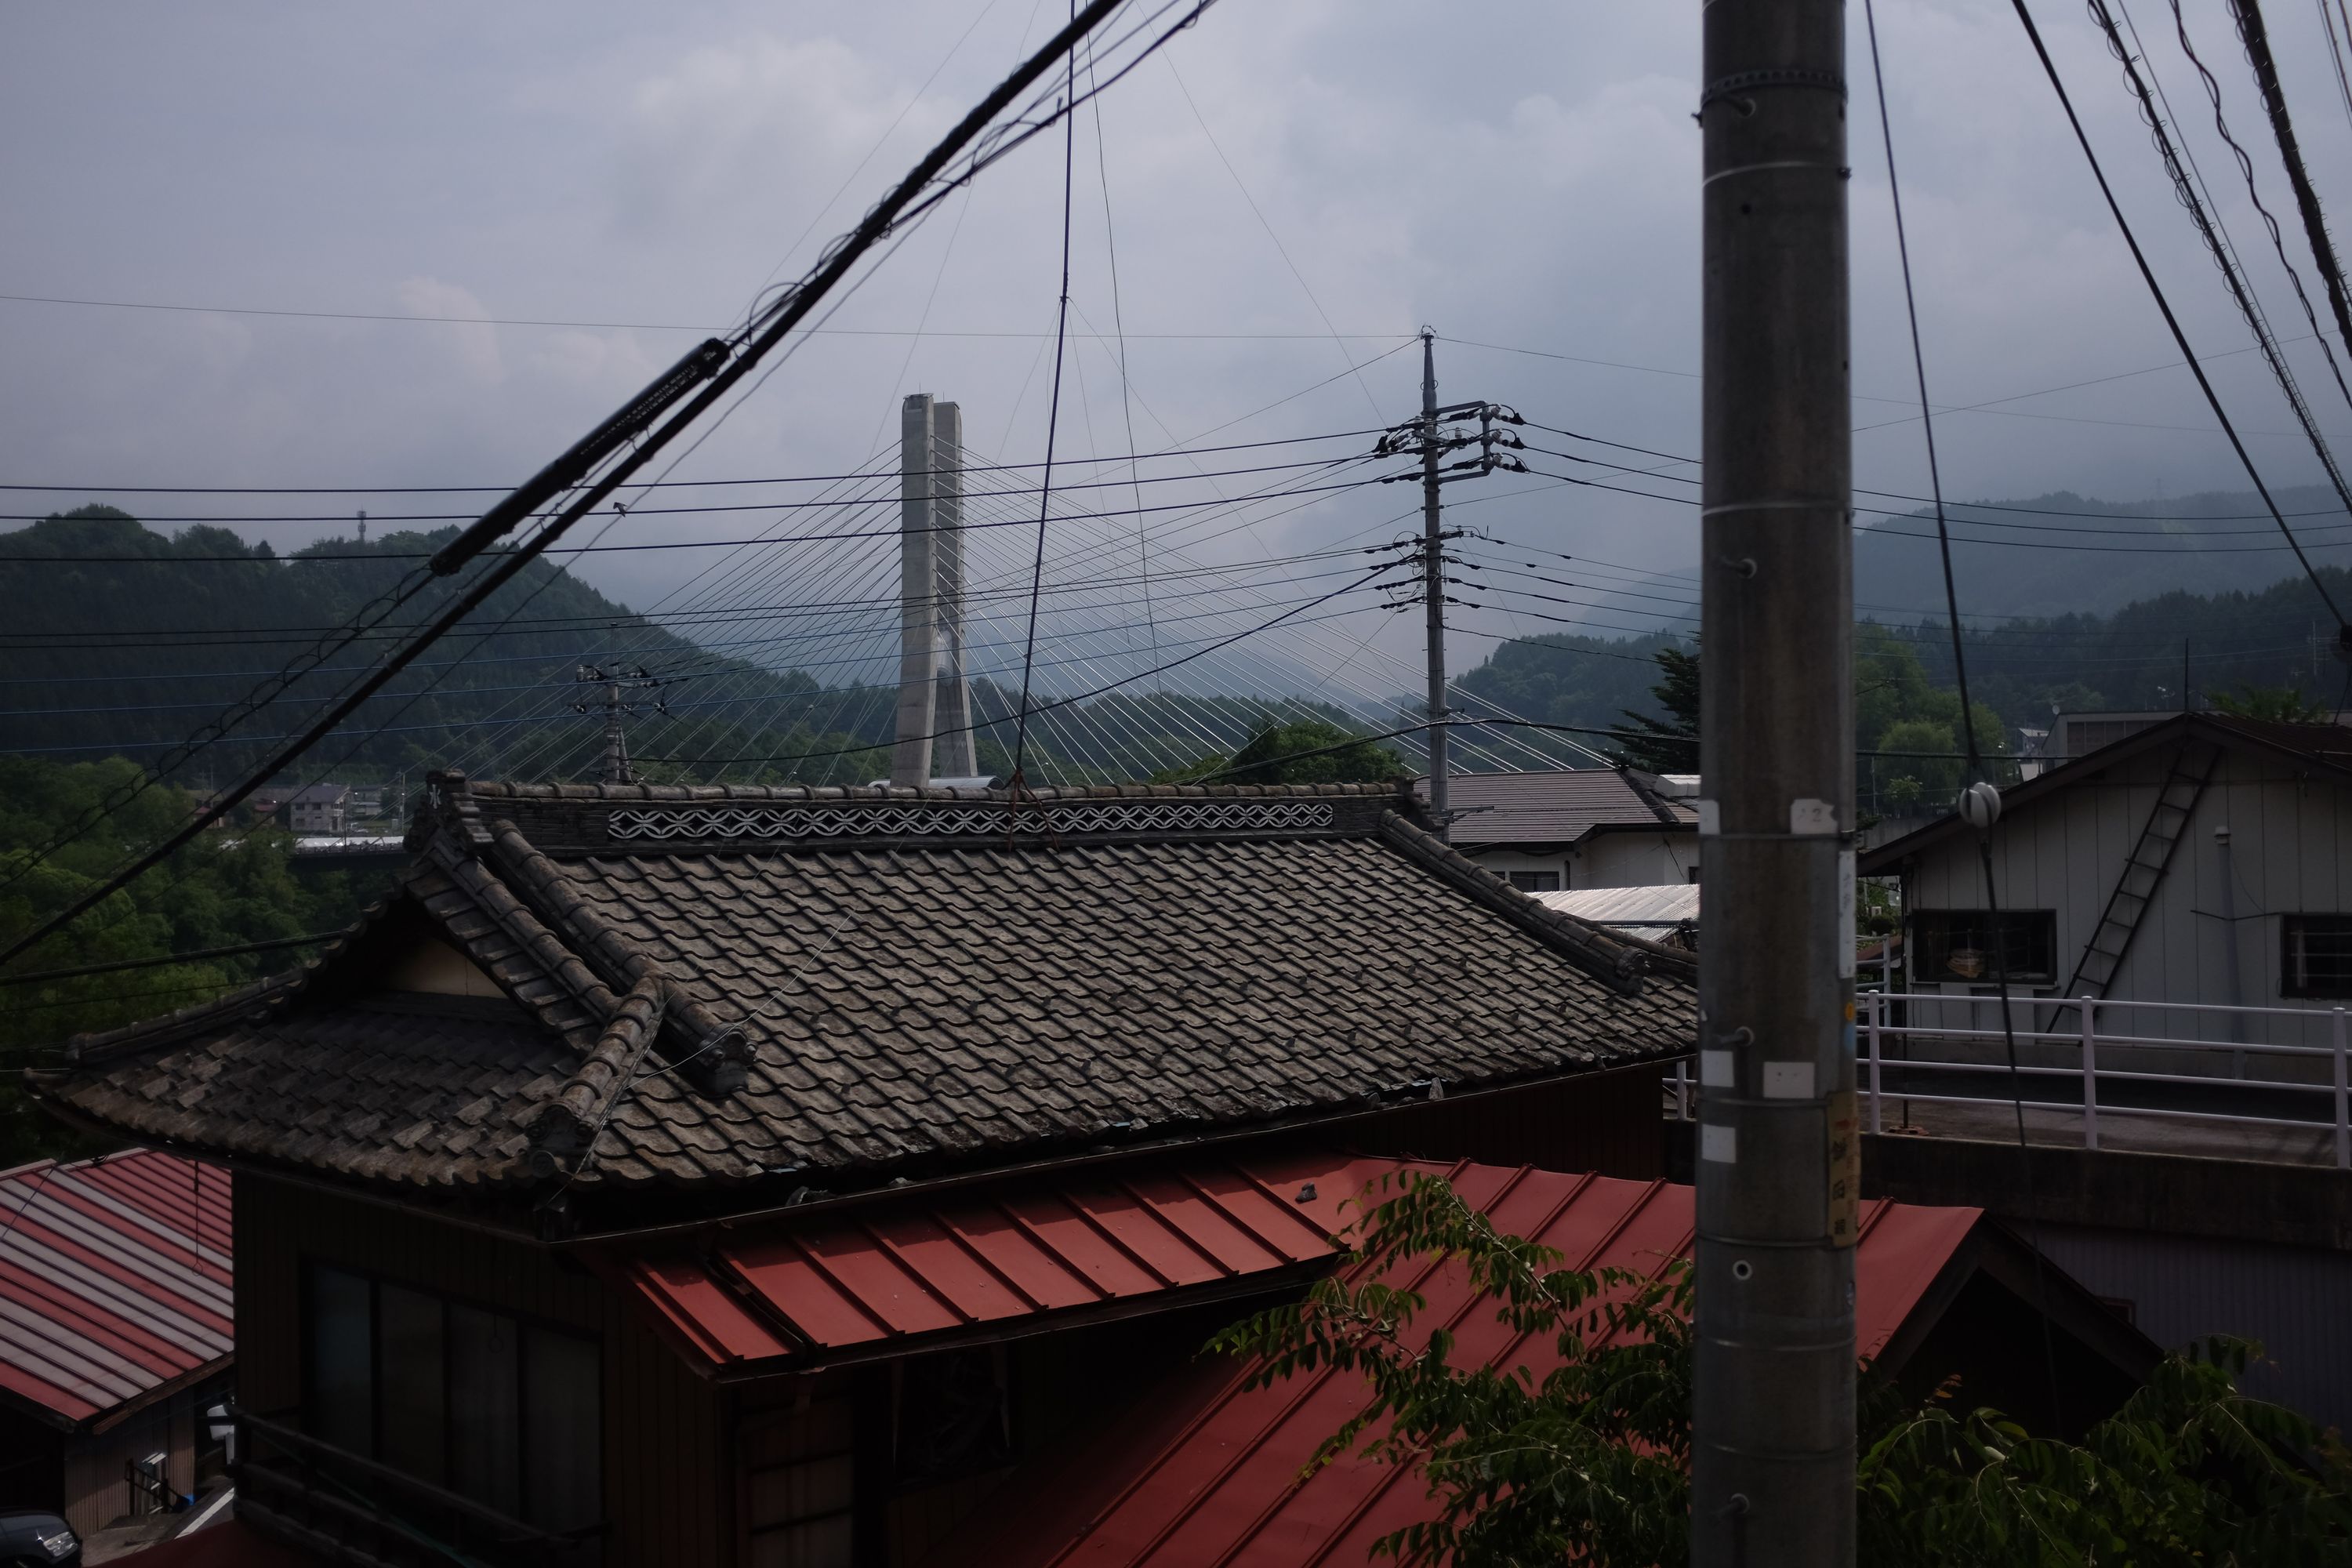 Looking towards the mountains over the roof of a Japanese house, lots of cables, and a small suspension bridge.